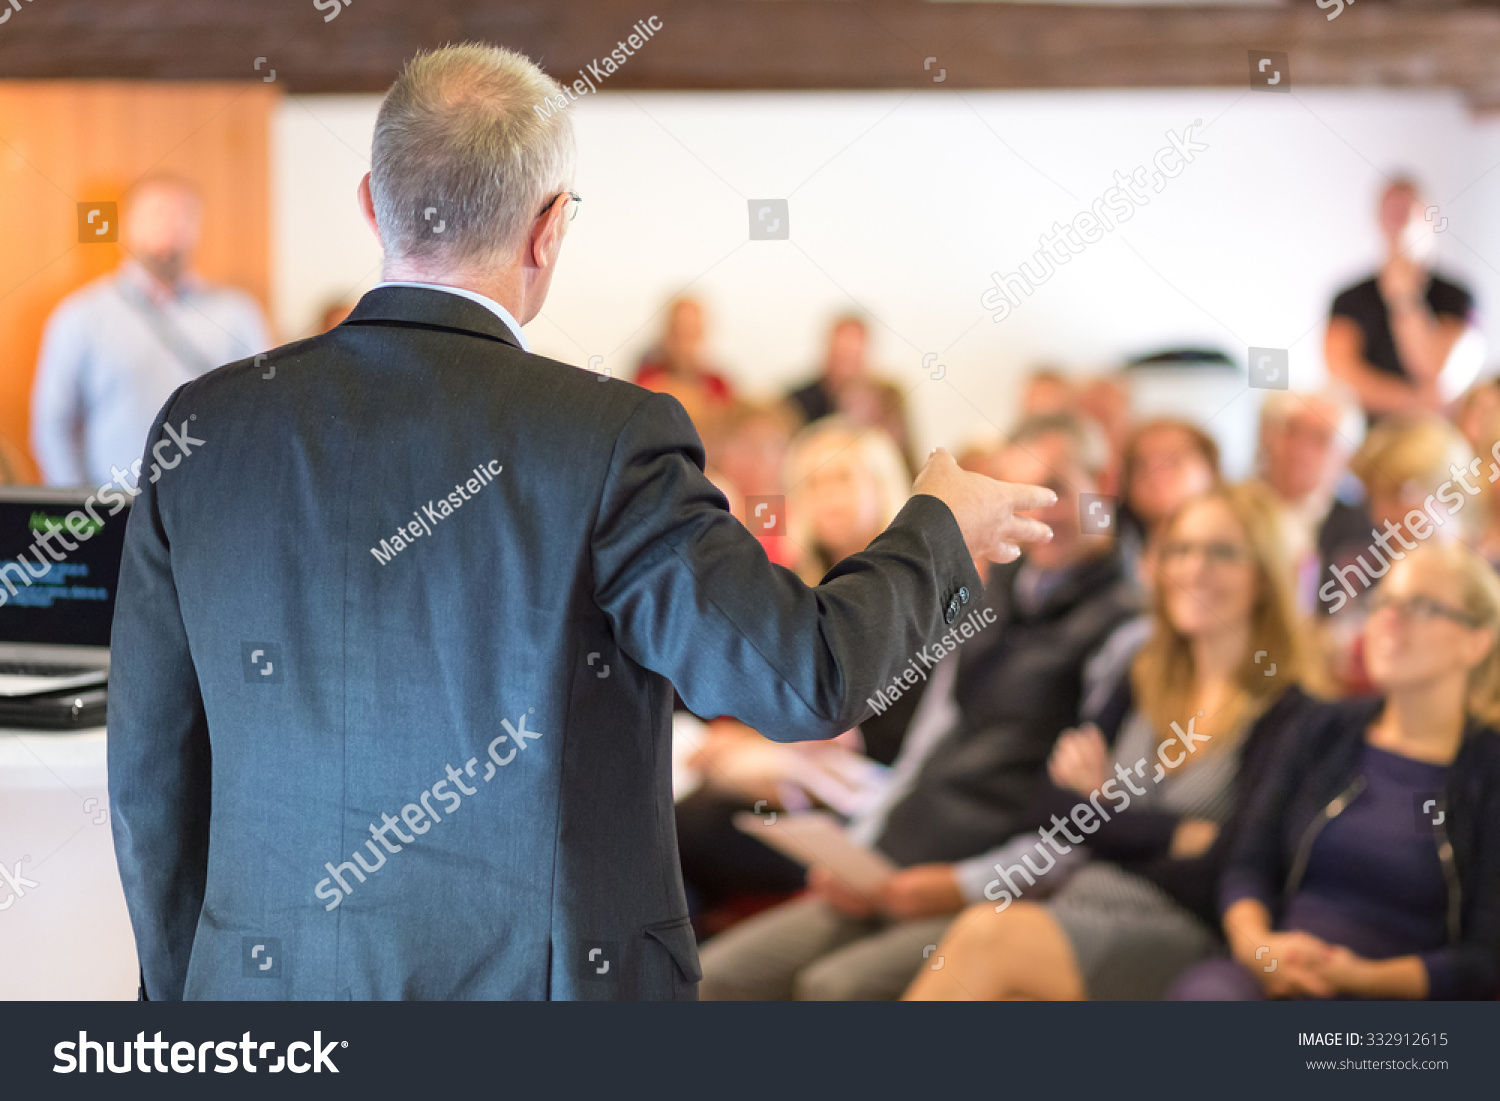 Business man leading a business workshop. Corporate executive delivering a presentation to his colleagues during meeting or in-house business training. Business and entrepreneurship concept. #332912615